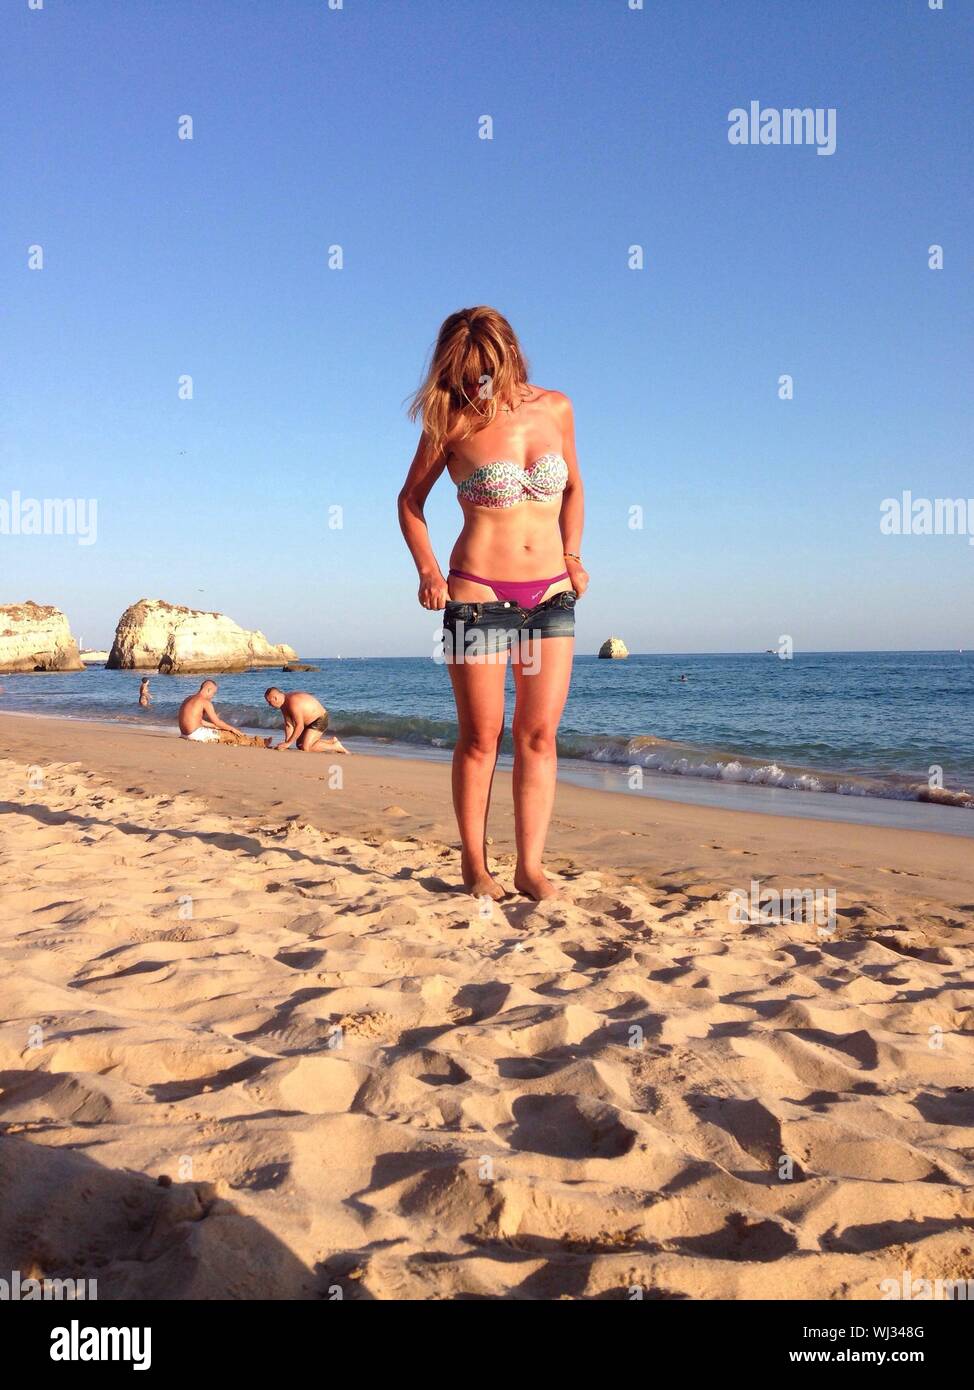 Woman Wearing Hot Pants Standing On Shore At Beach Against Sky Stock Photo  - Alamy